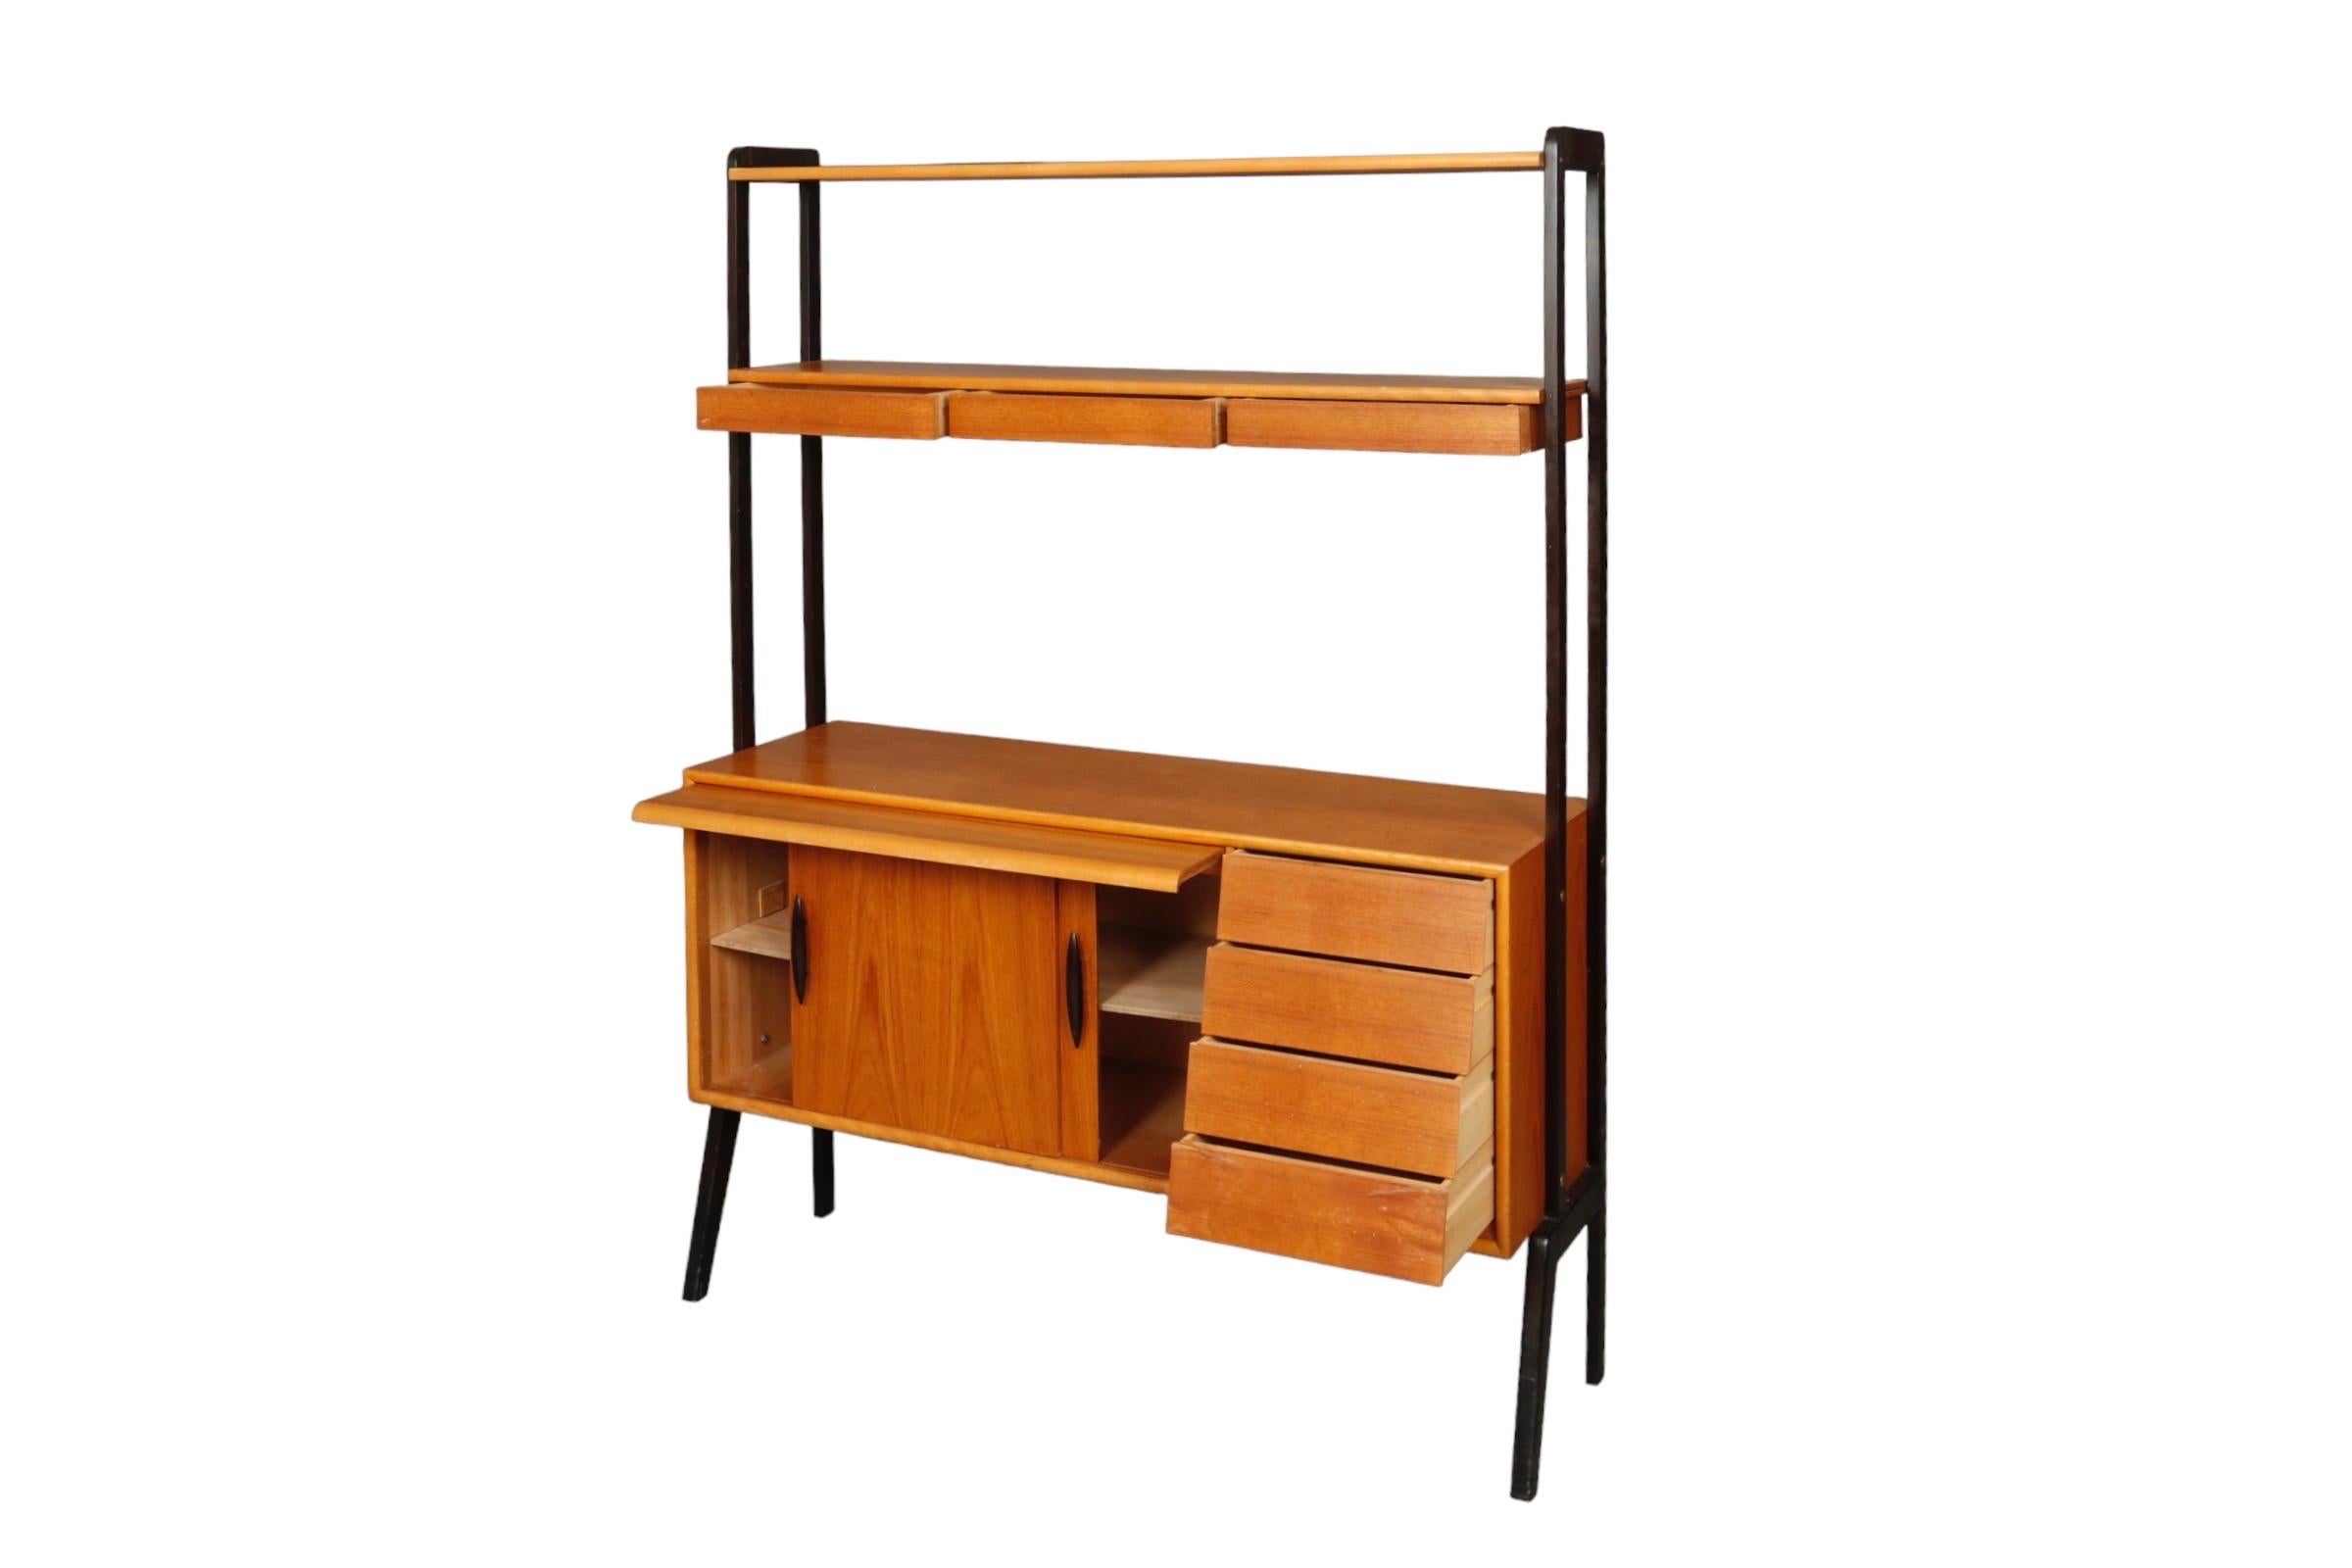 A Danish mid century bookcase with an industrial style black metal frame. Above are two shelves, one with three slender drawers, and below is a cabinet for storage with a pull out desk area. Sliding doors house a single shelf on the left and to the